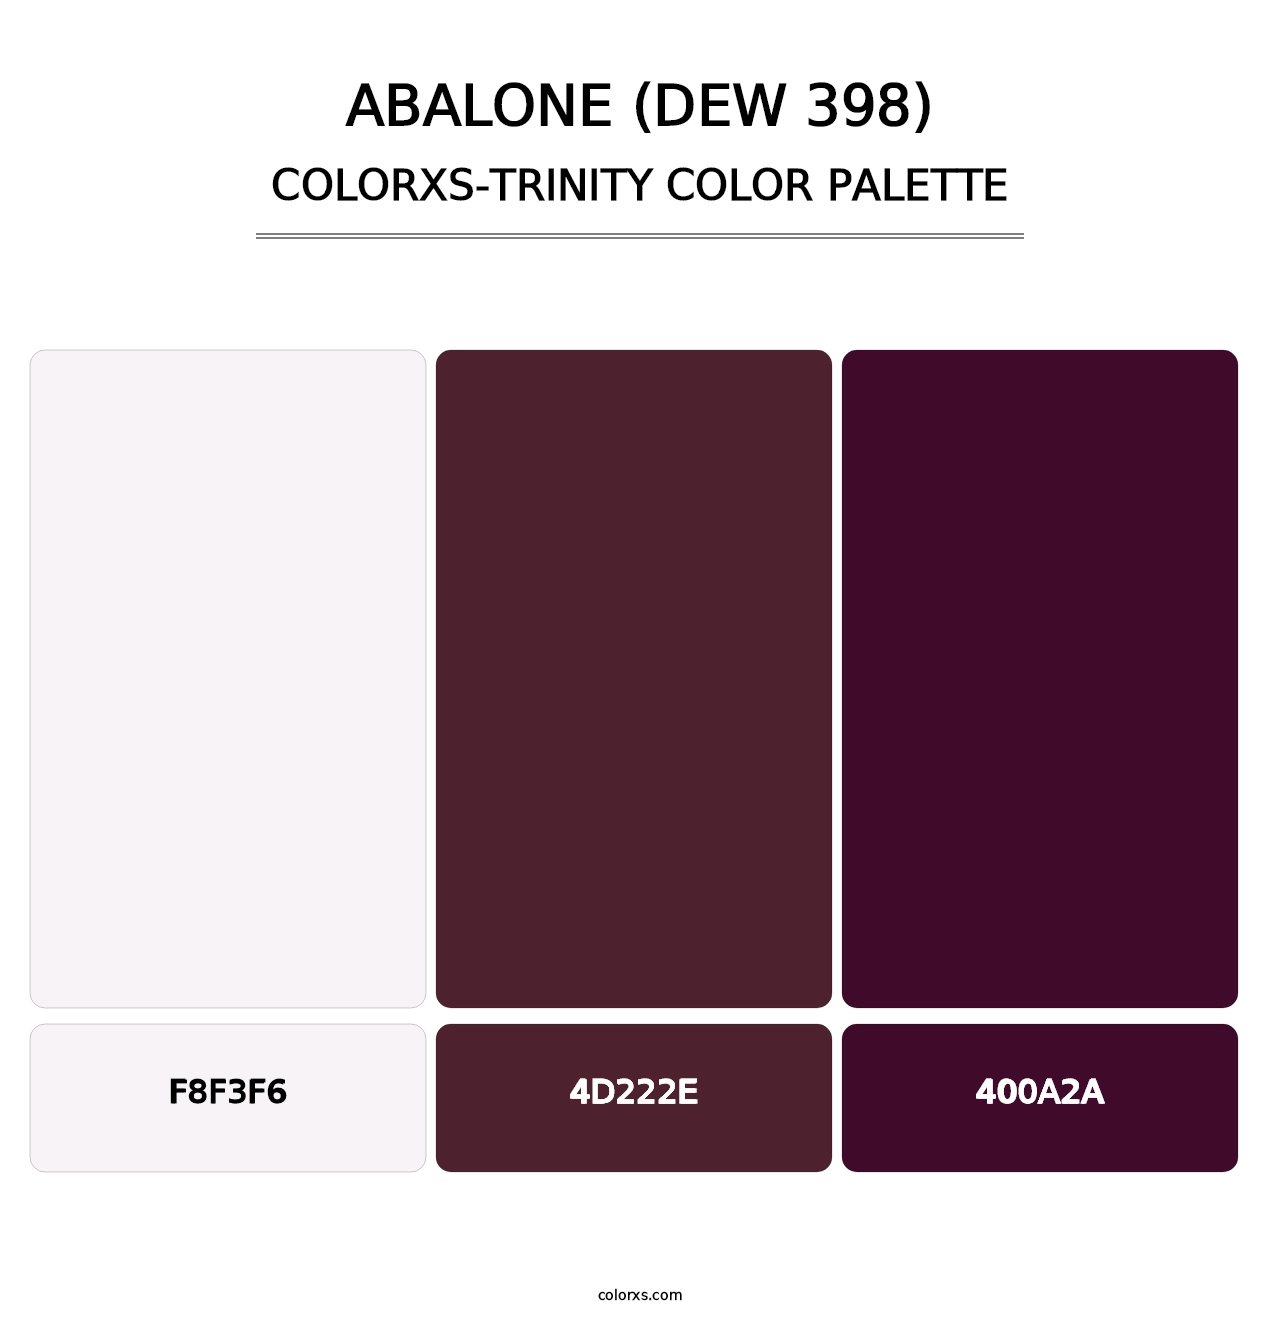 Abalone (DEW 398) - Colorxs Trinity Palette